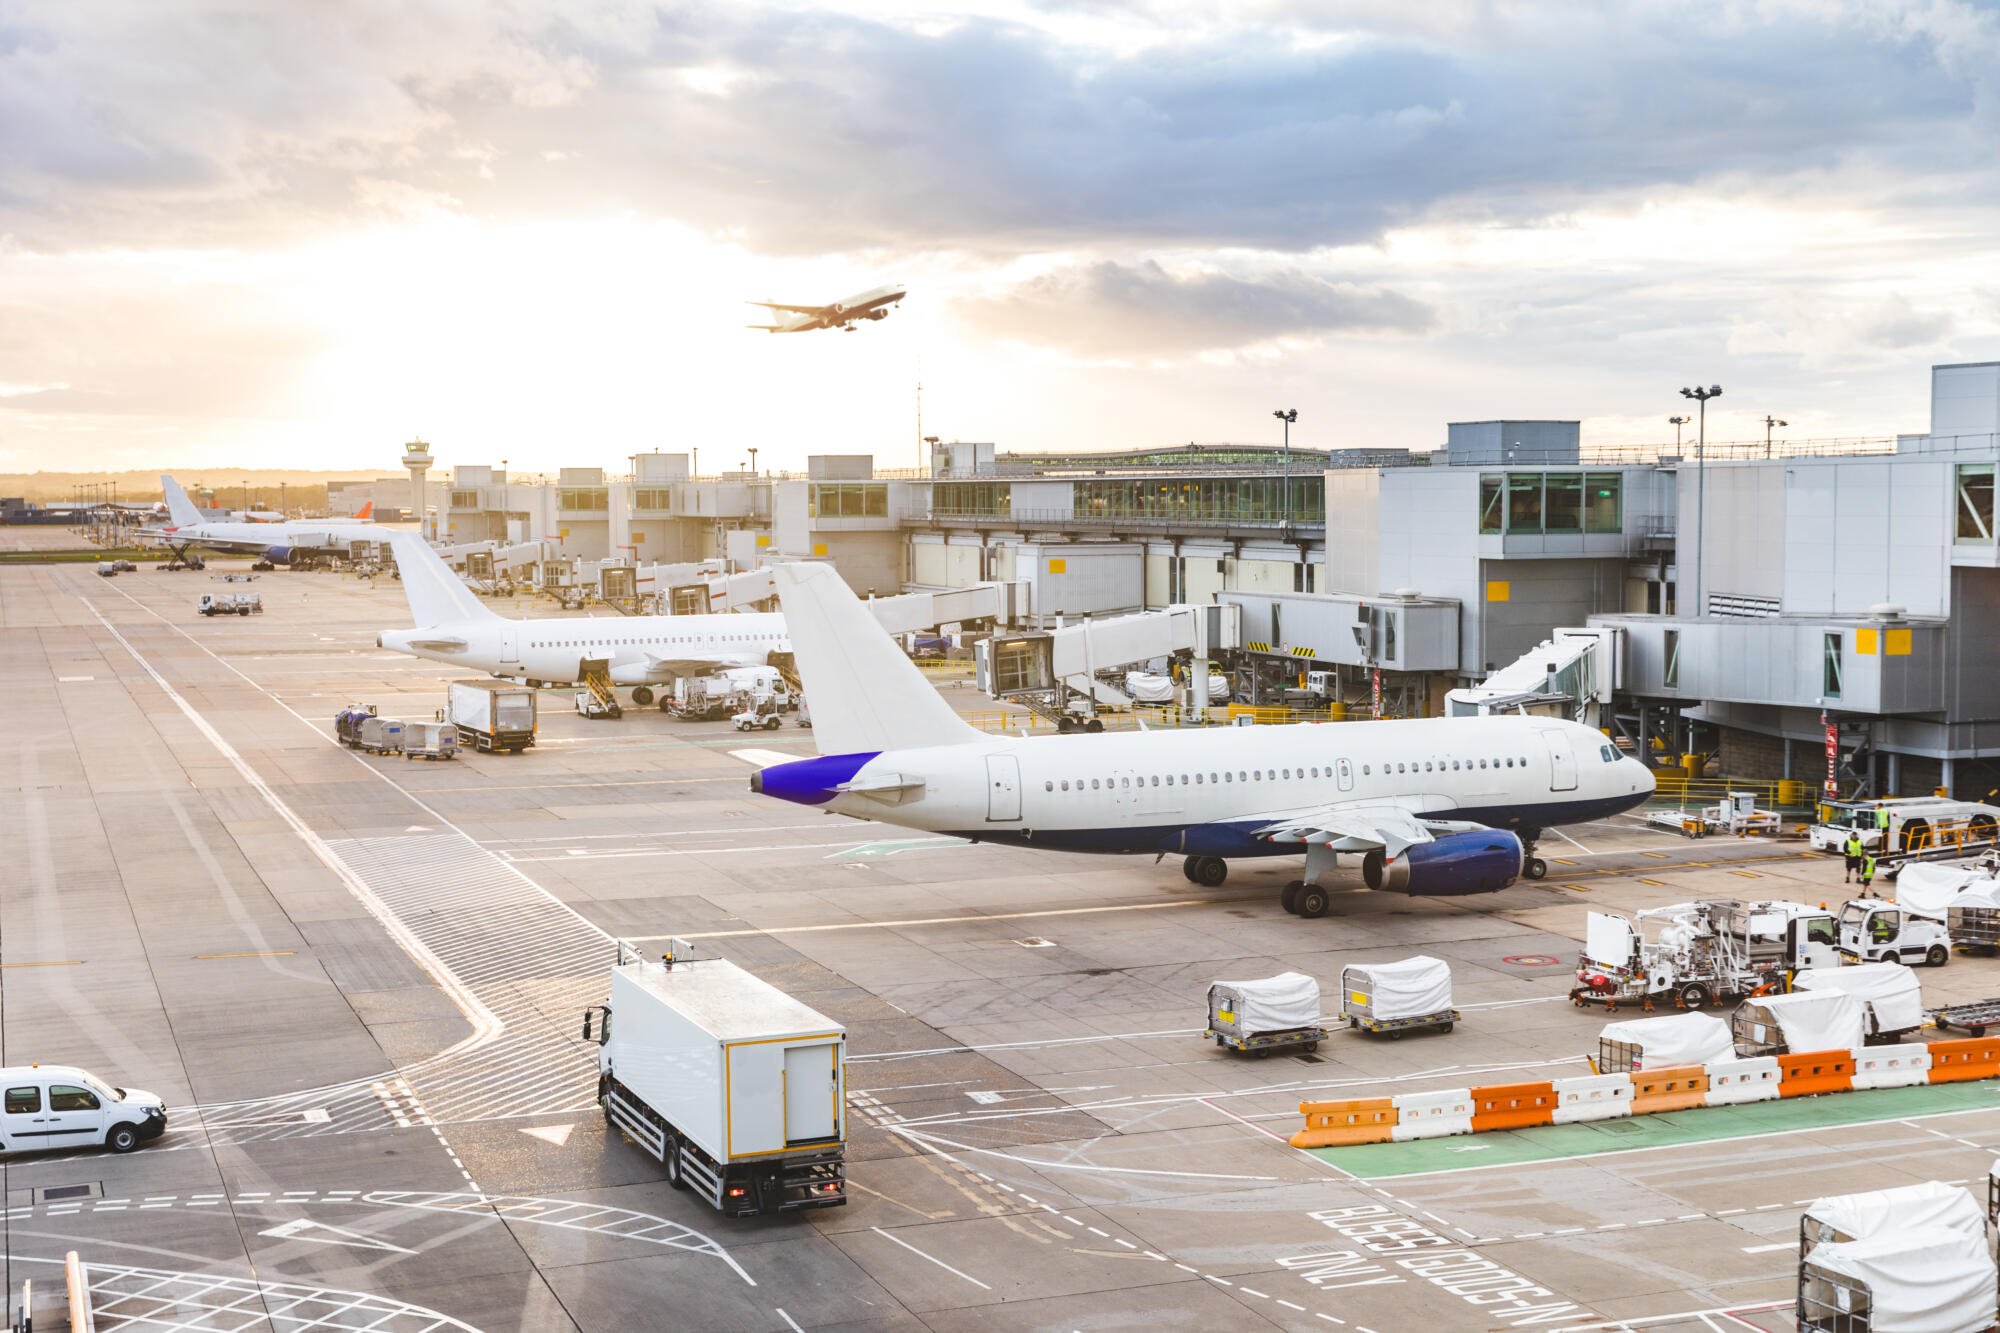 A photo of a busy airport, with multiple airplanes and the sun shining.